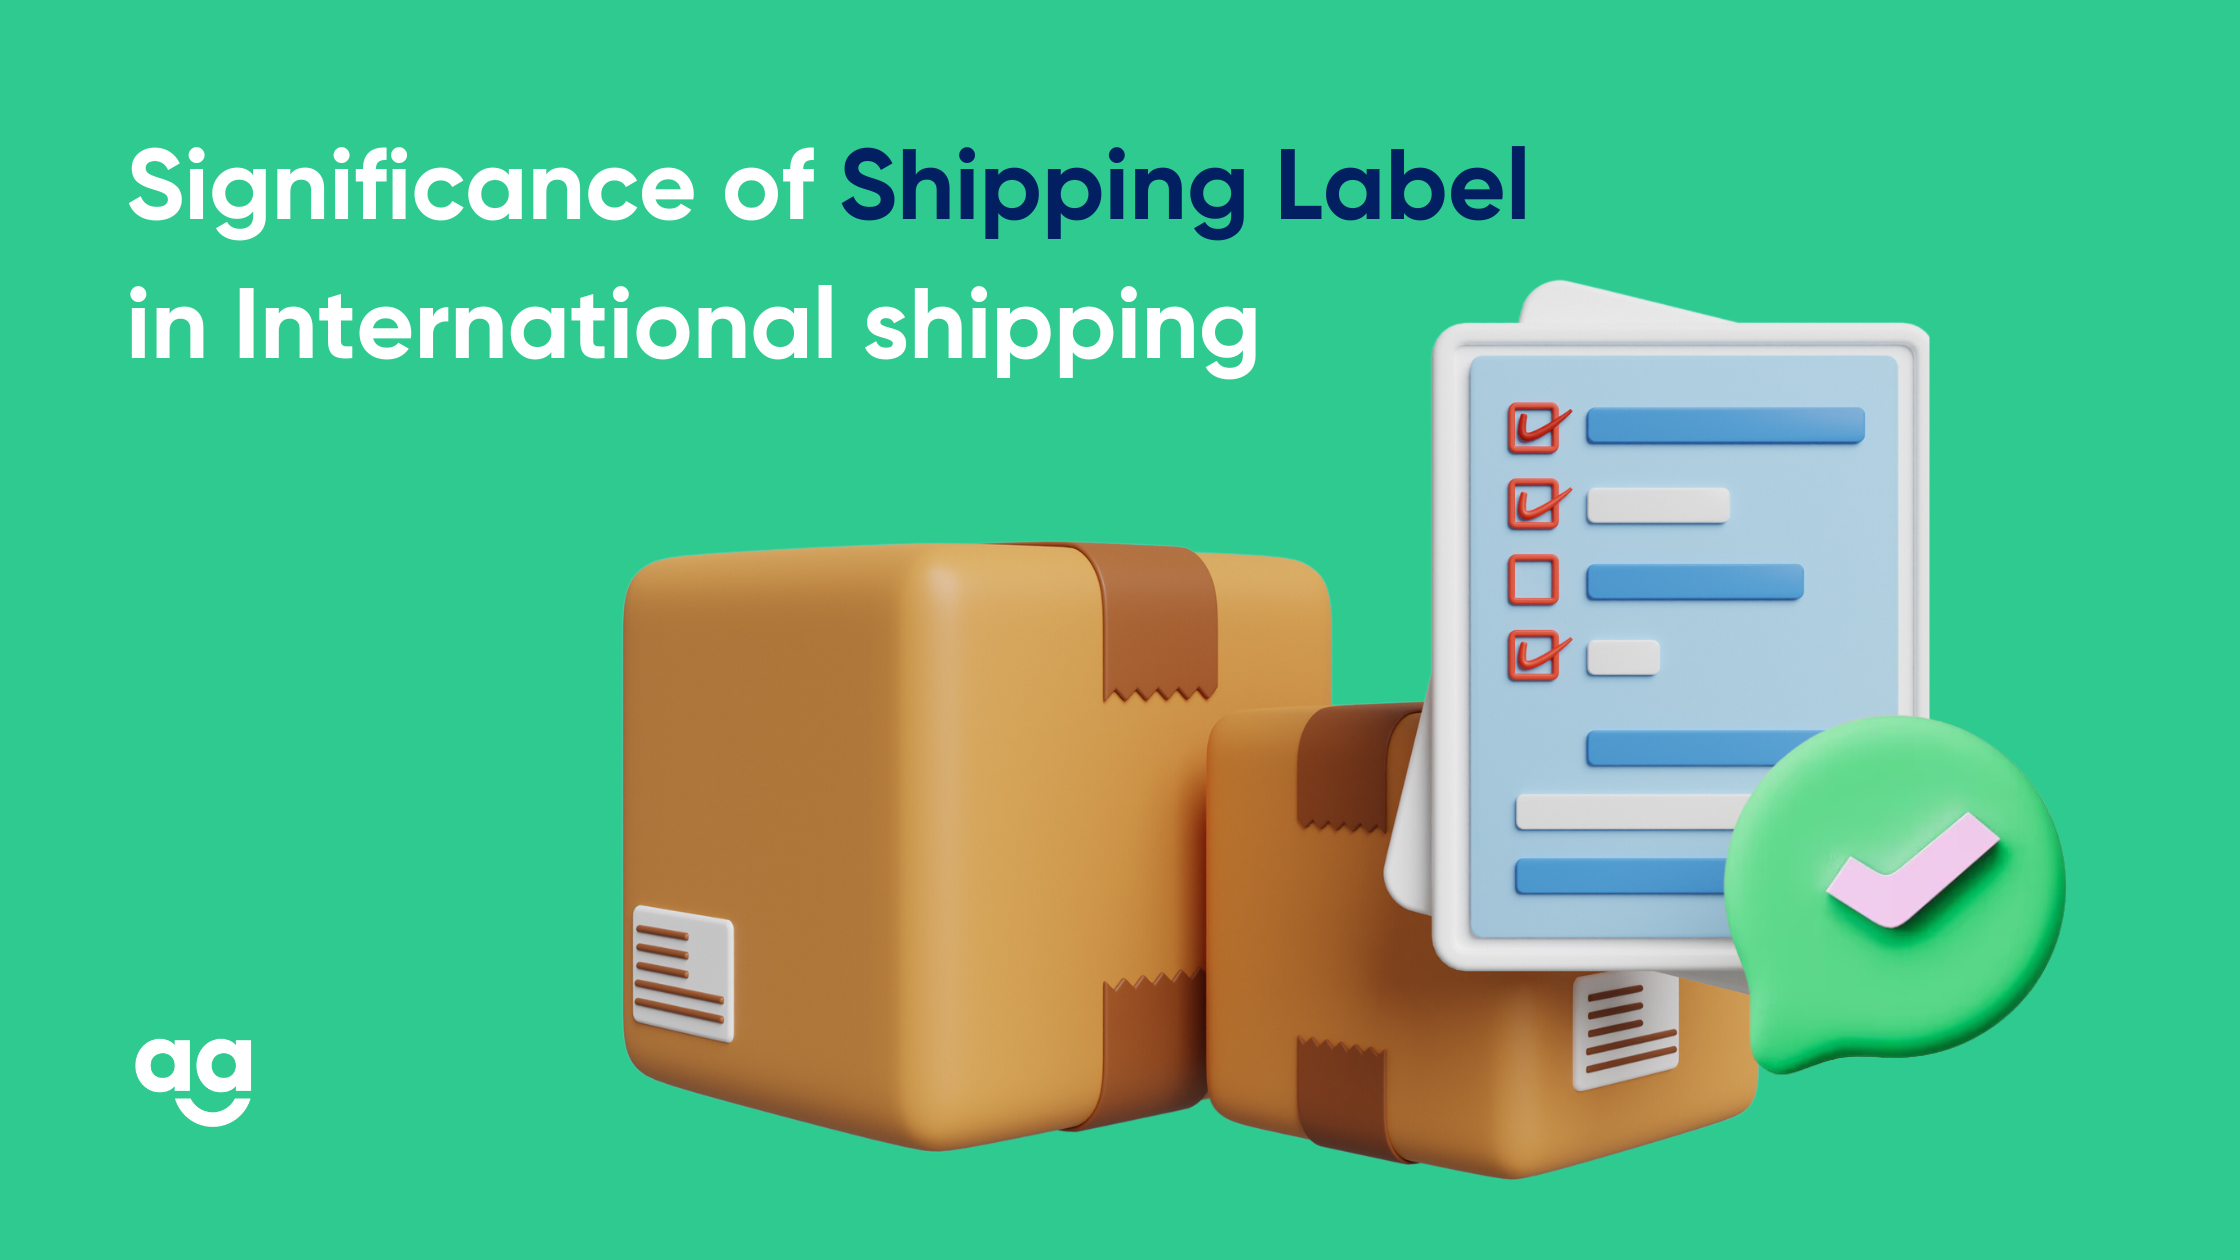 Significance of Shipping Label in International shipping